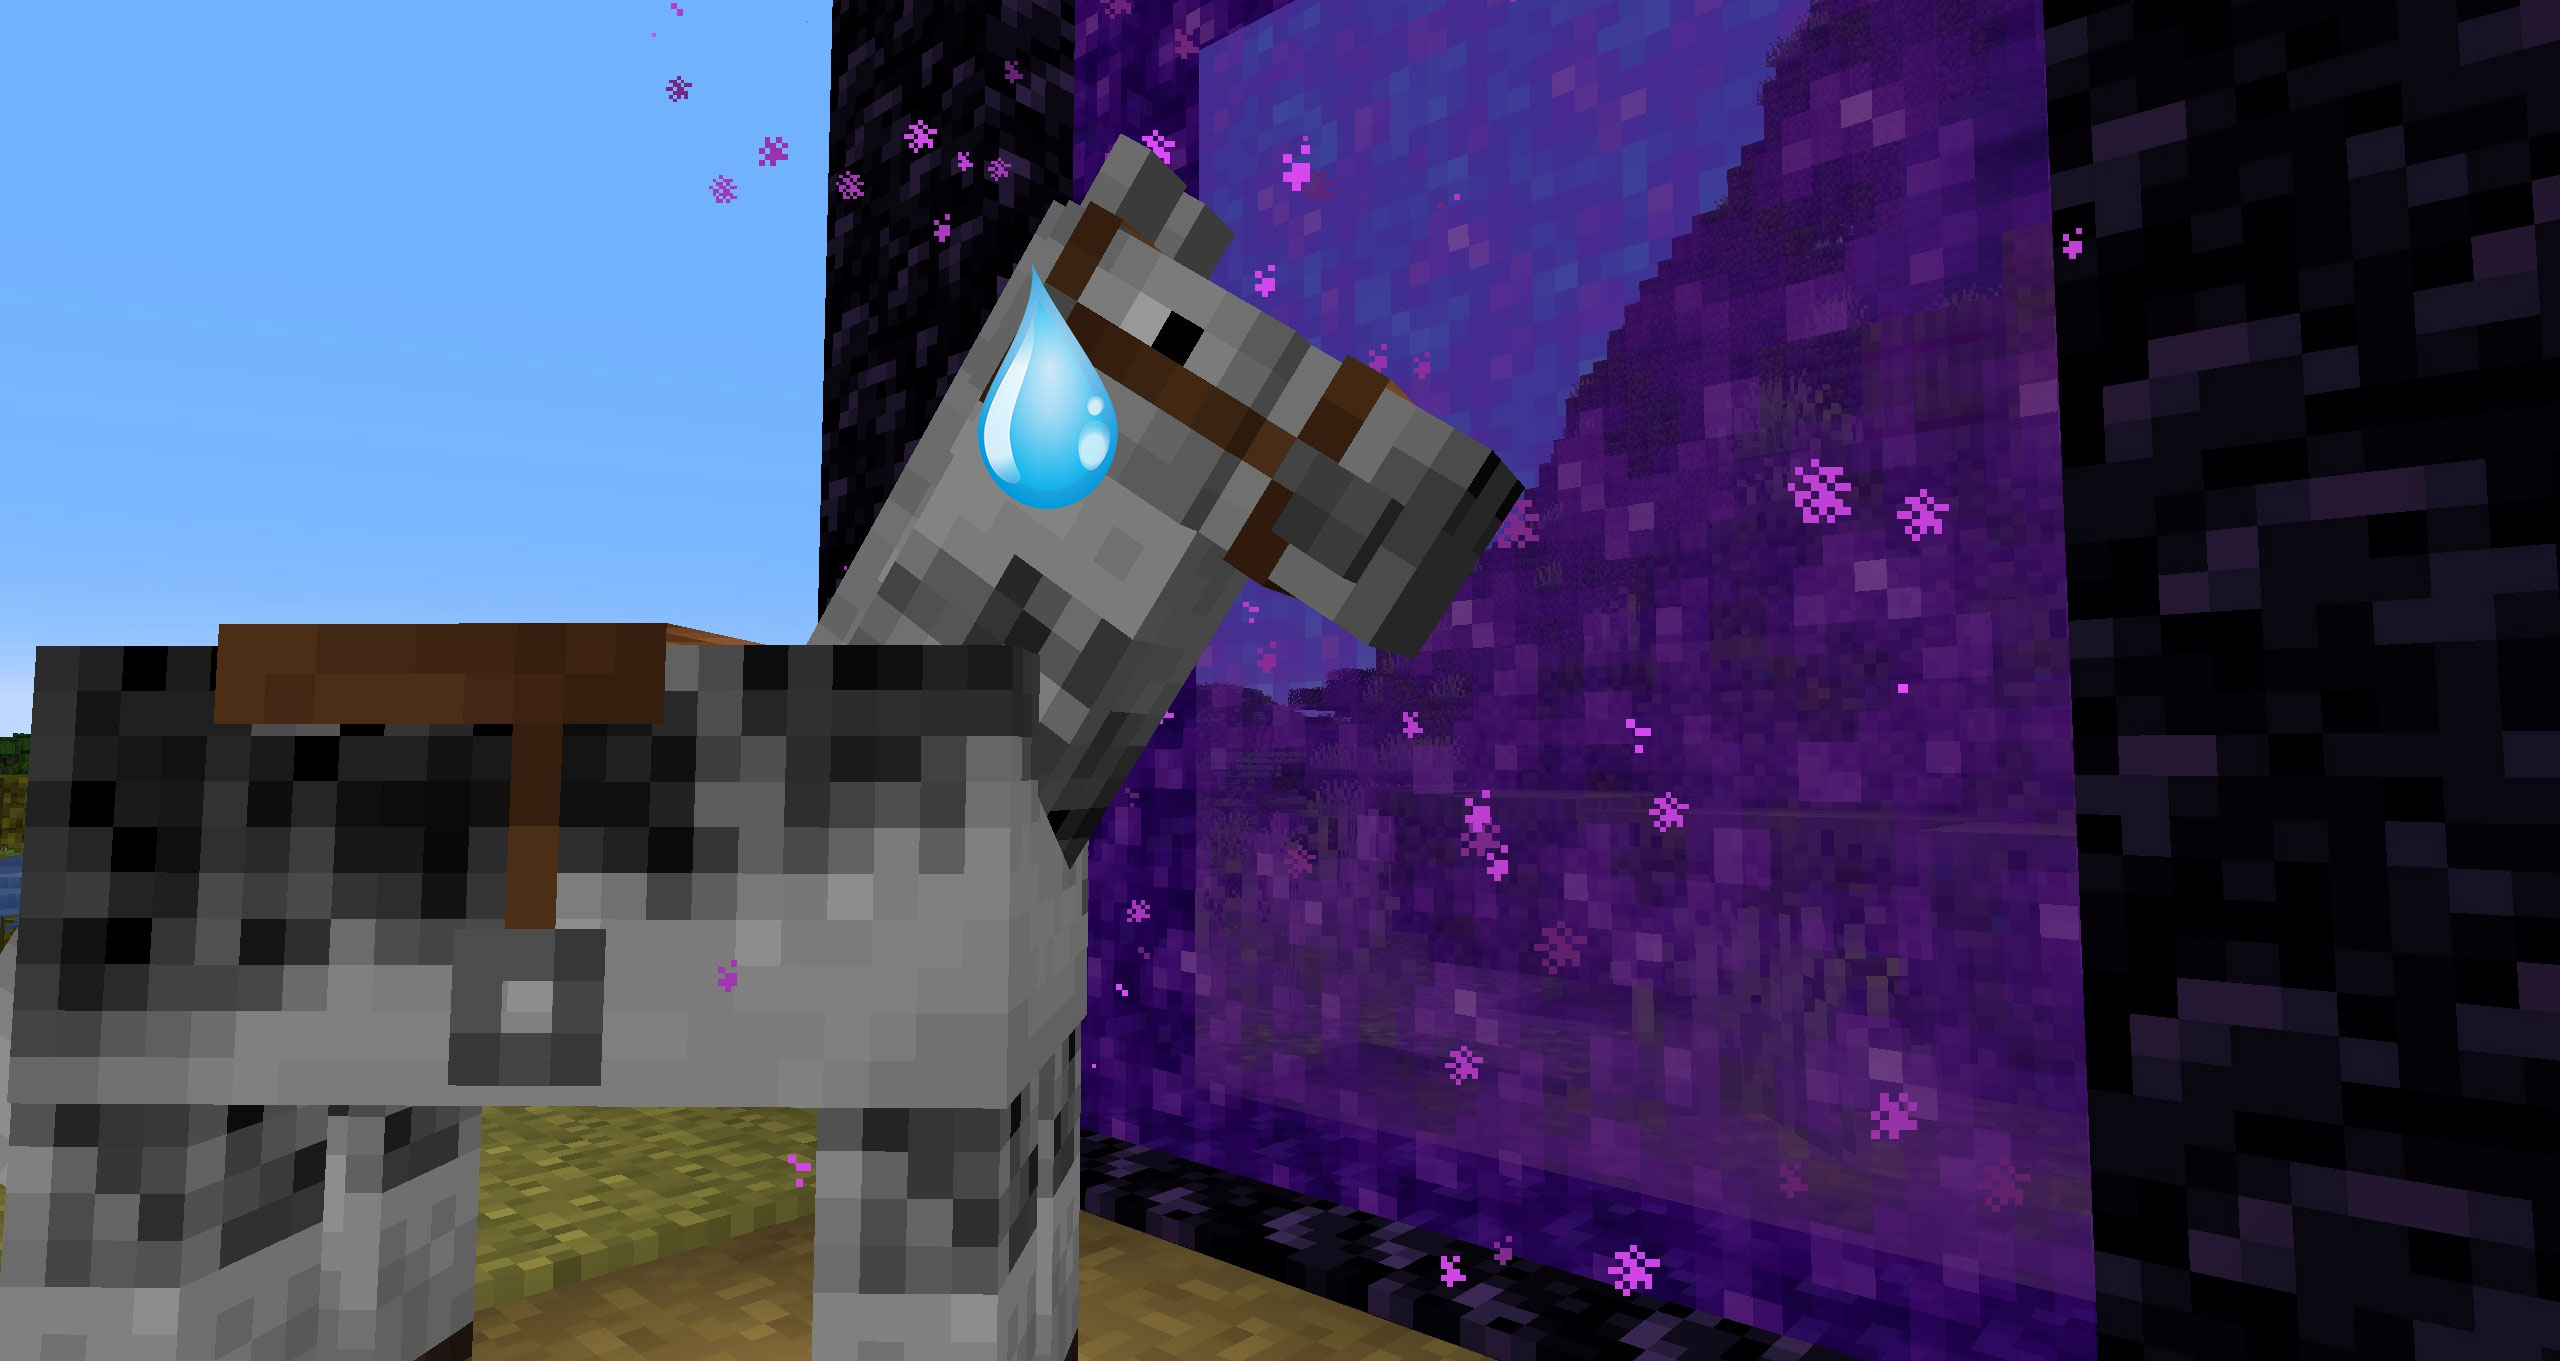  New Minecraft patch rescues horses who were suffocating to death 